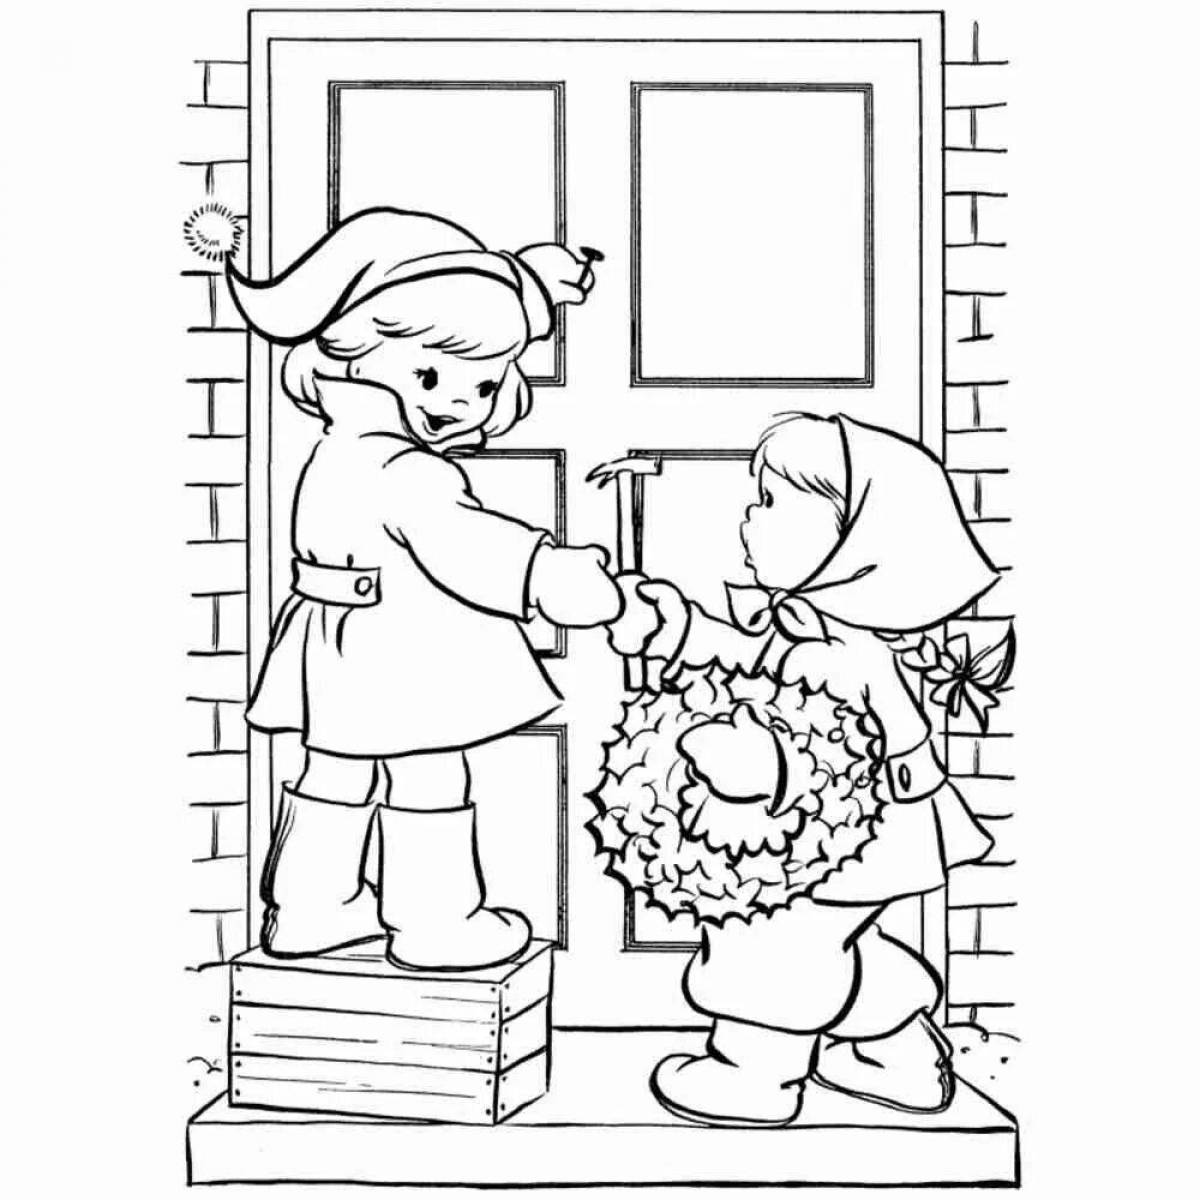 Luminous Christmas carol coloring pages for children